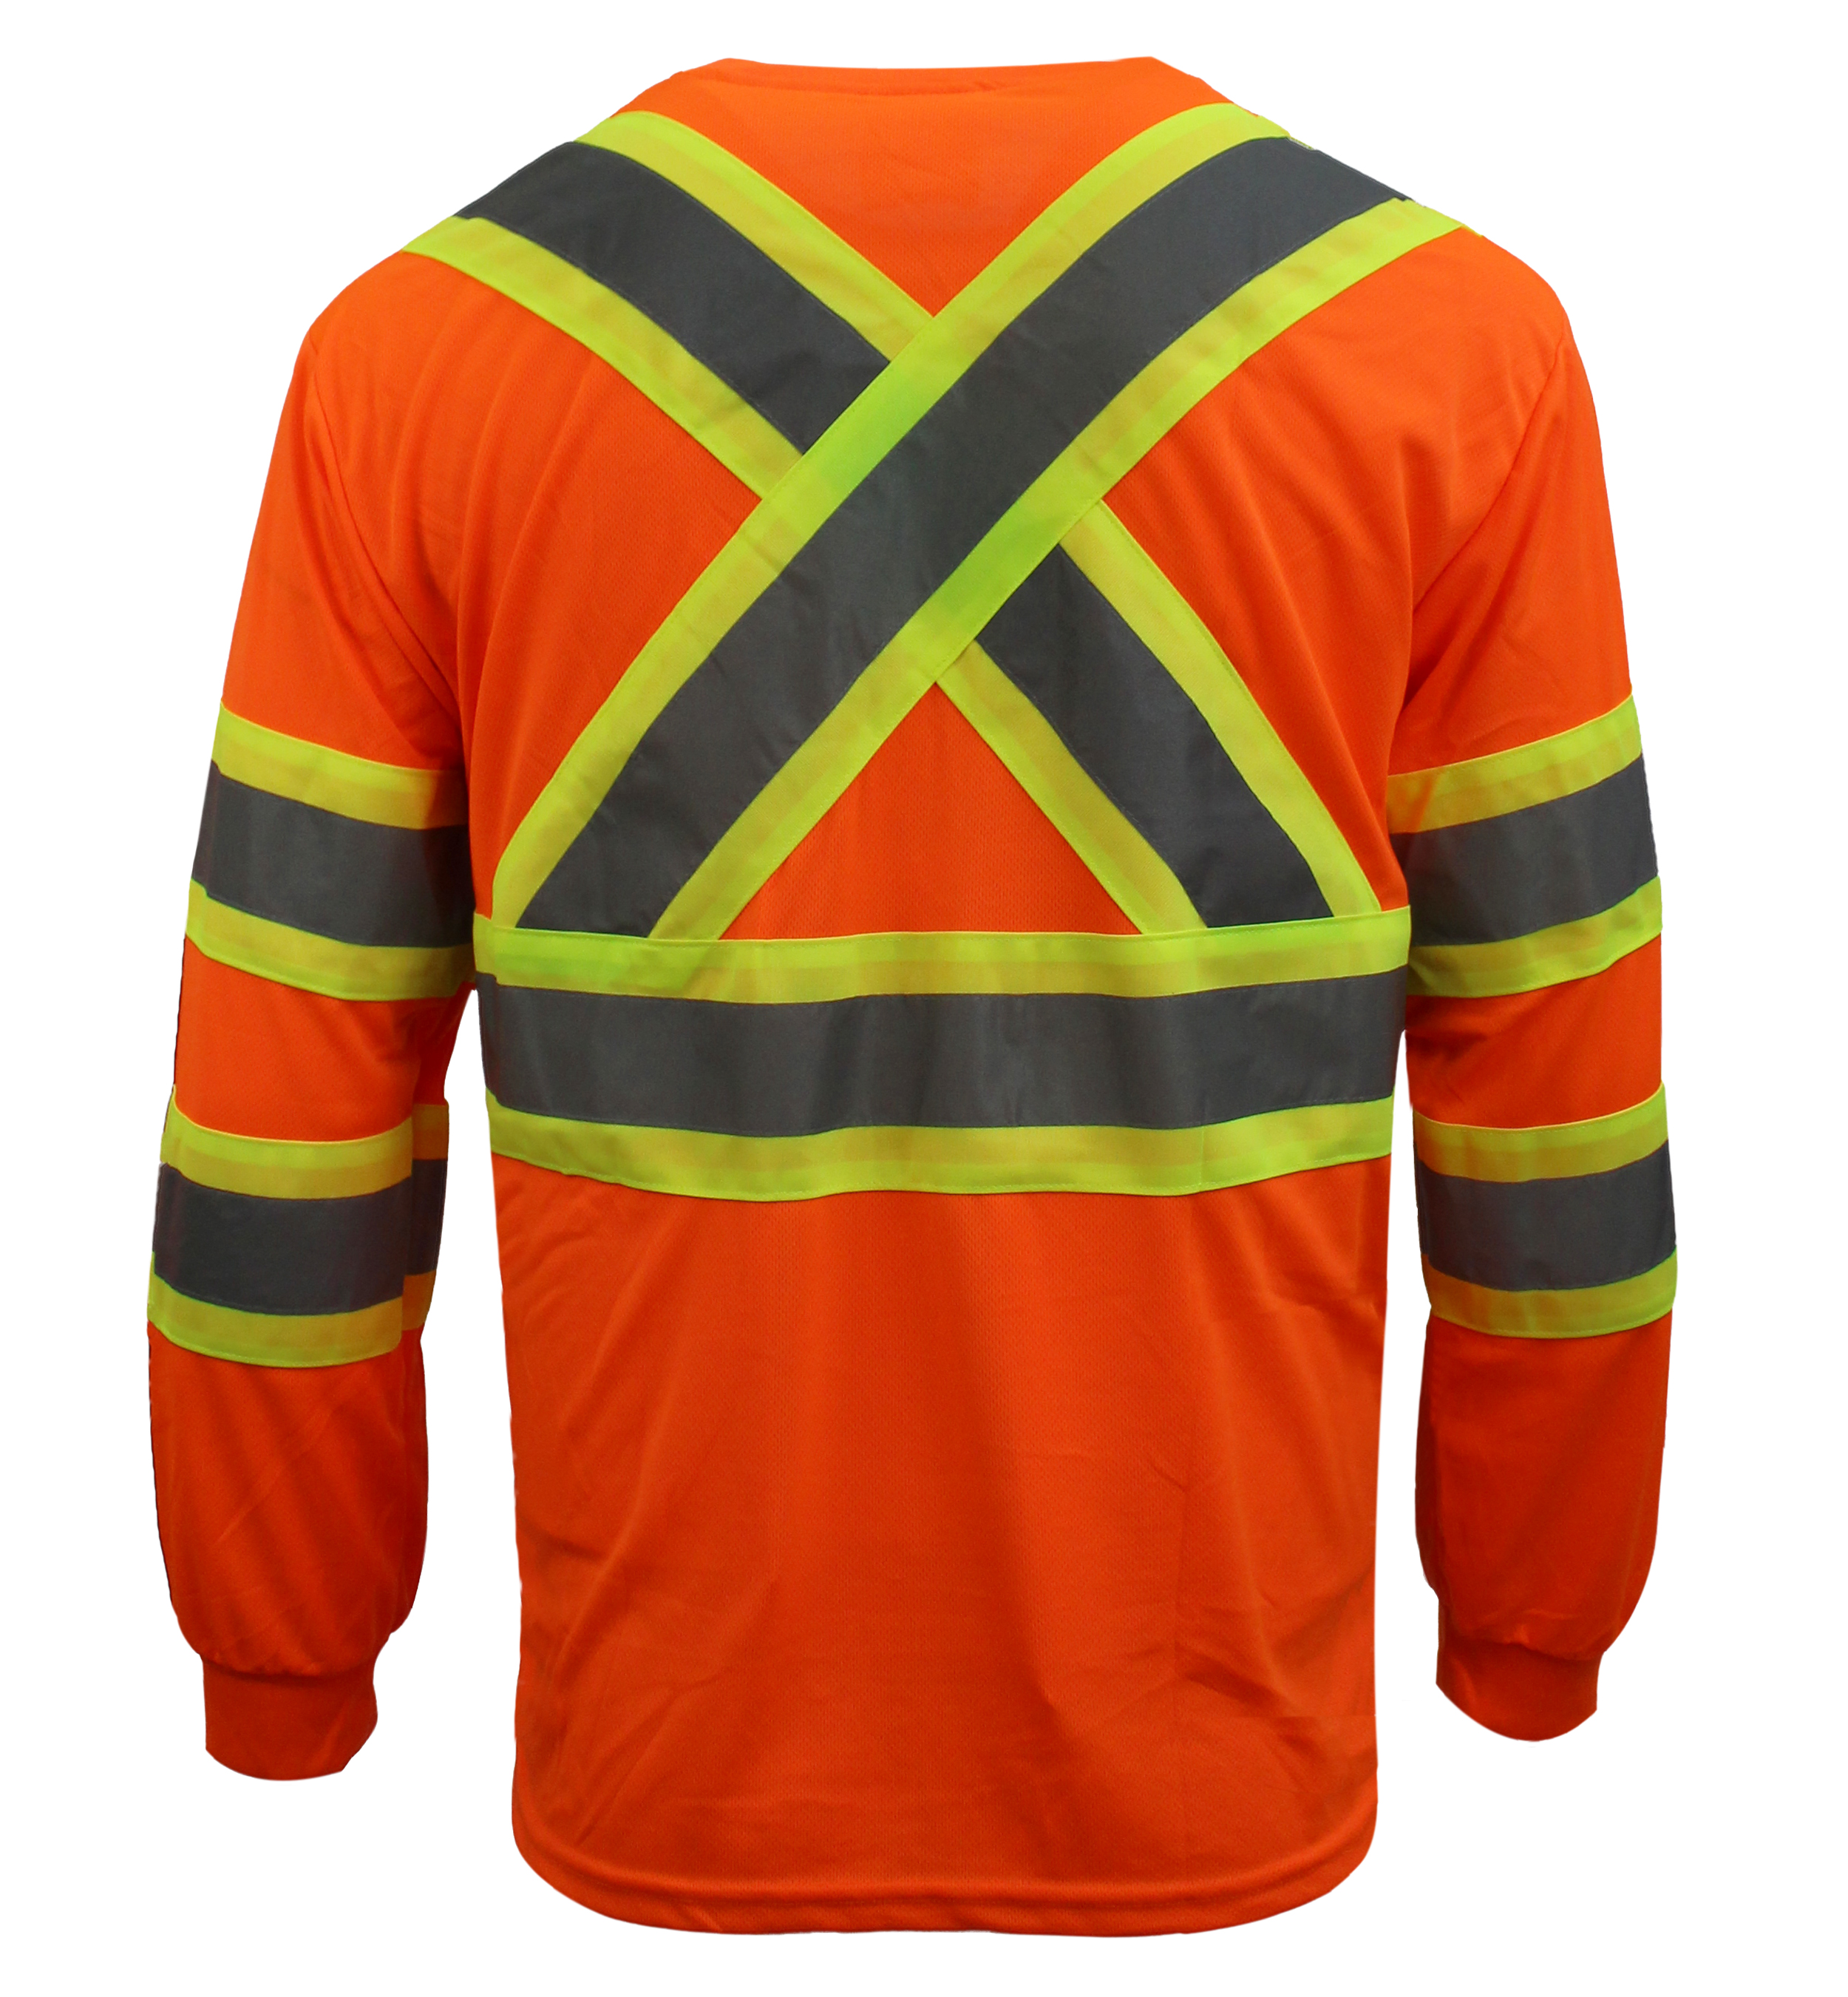 RK Safety 8511 High Visibility Safety Vest with Reflective Strips and Pocke - 3